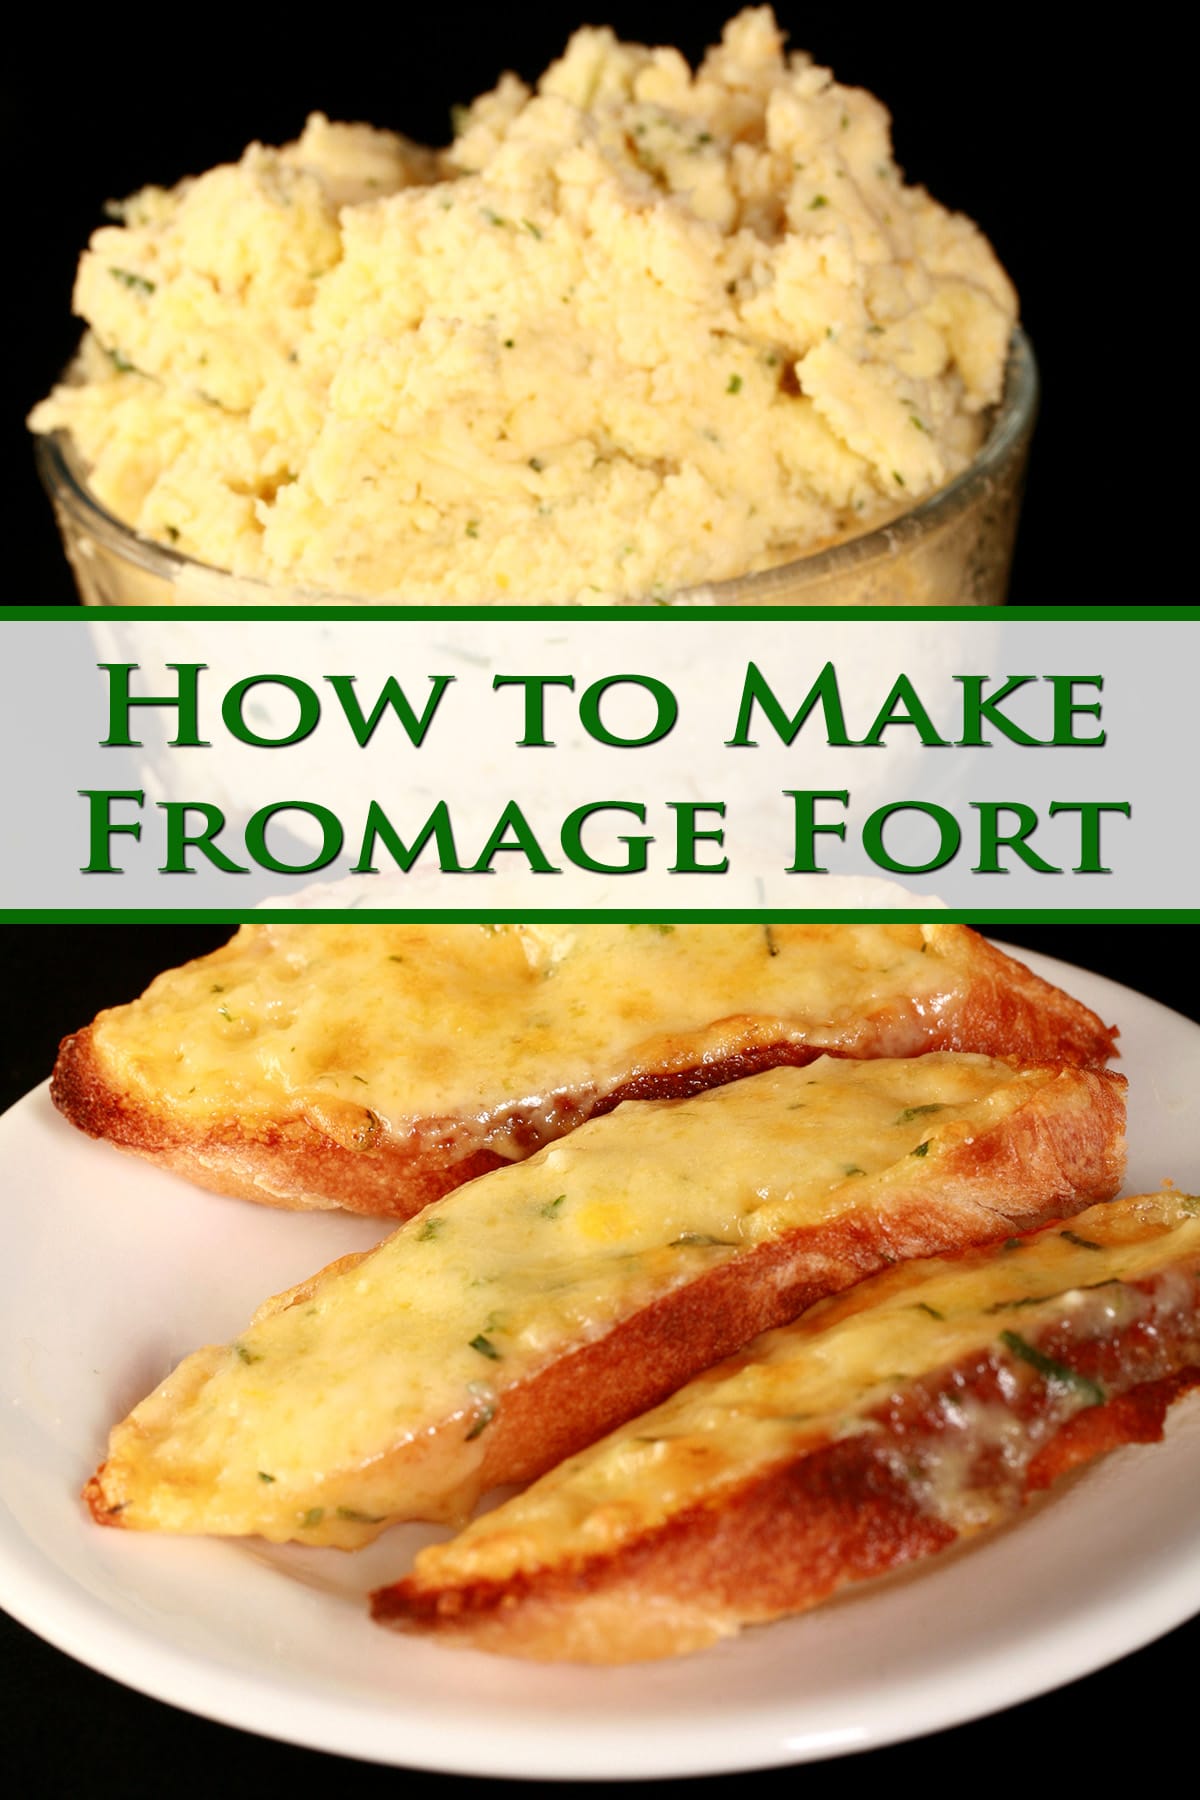 A plate of broiled garlic cheese bread made with fromage fort.